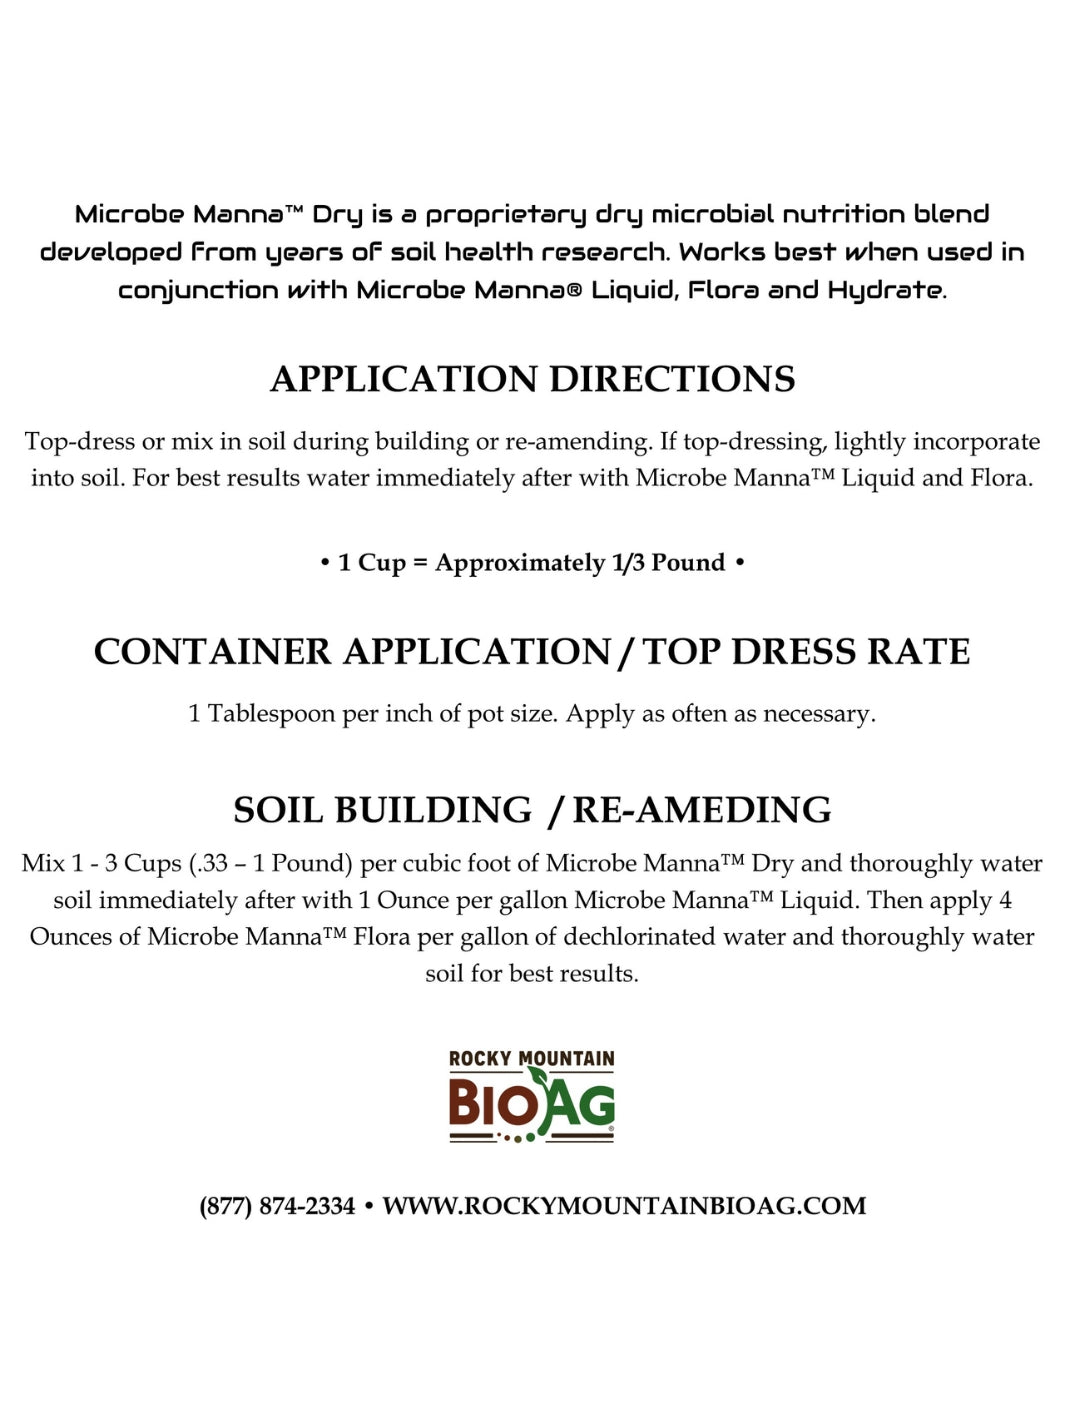 Microbe Manna Dry Soil Nutrition Blend Directions